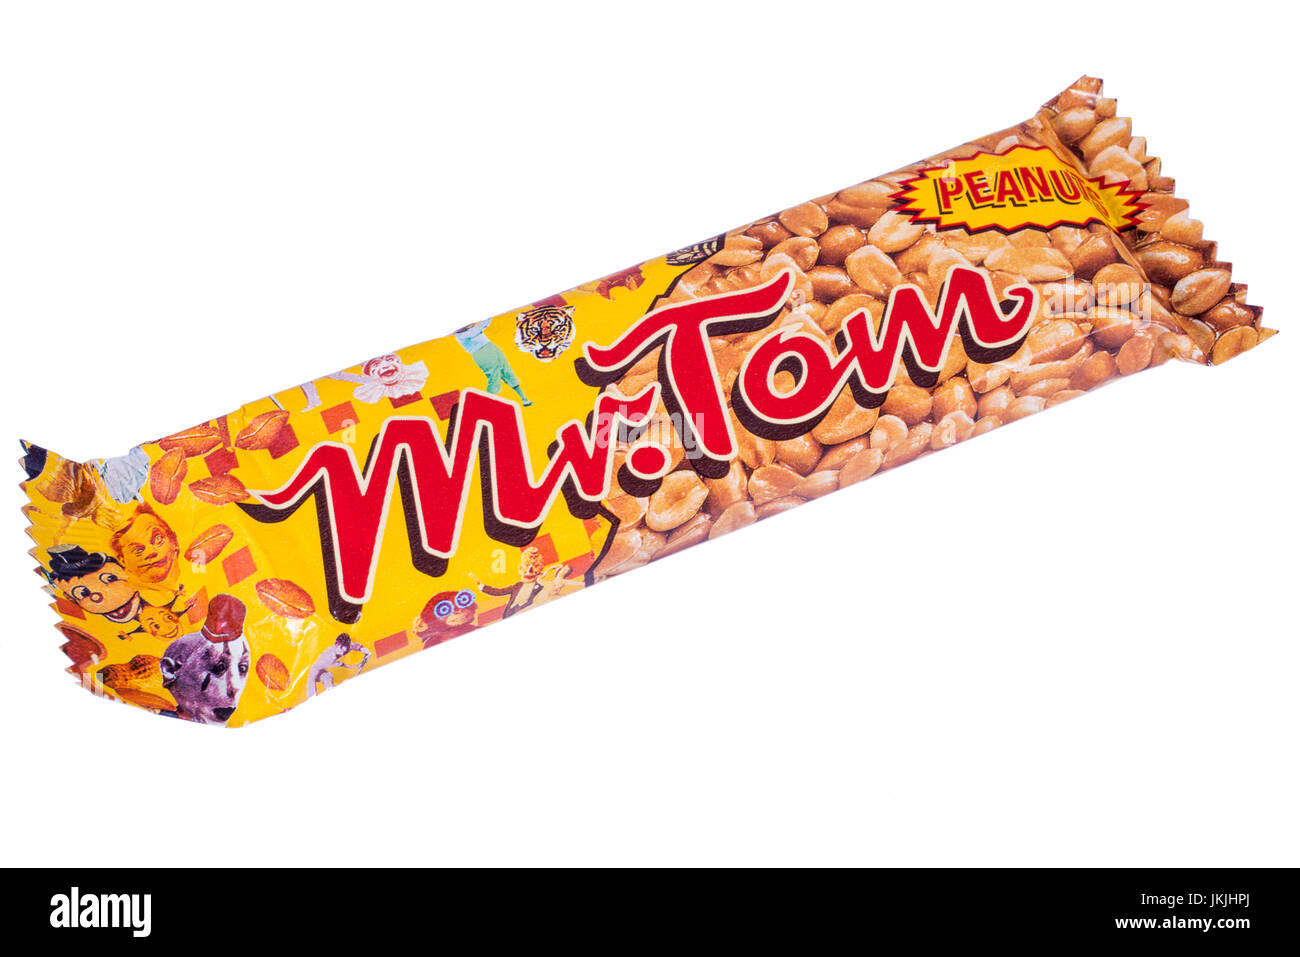 LONDON, UK - JULY 7TH 2017: A shot of a Mr. Tom Peanut confectionery bar, manufactured by Hosta Meltis, over a plain white background, on 7th July 201 Stock Photo